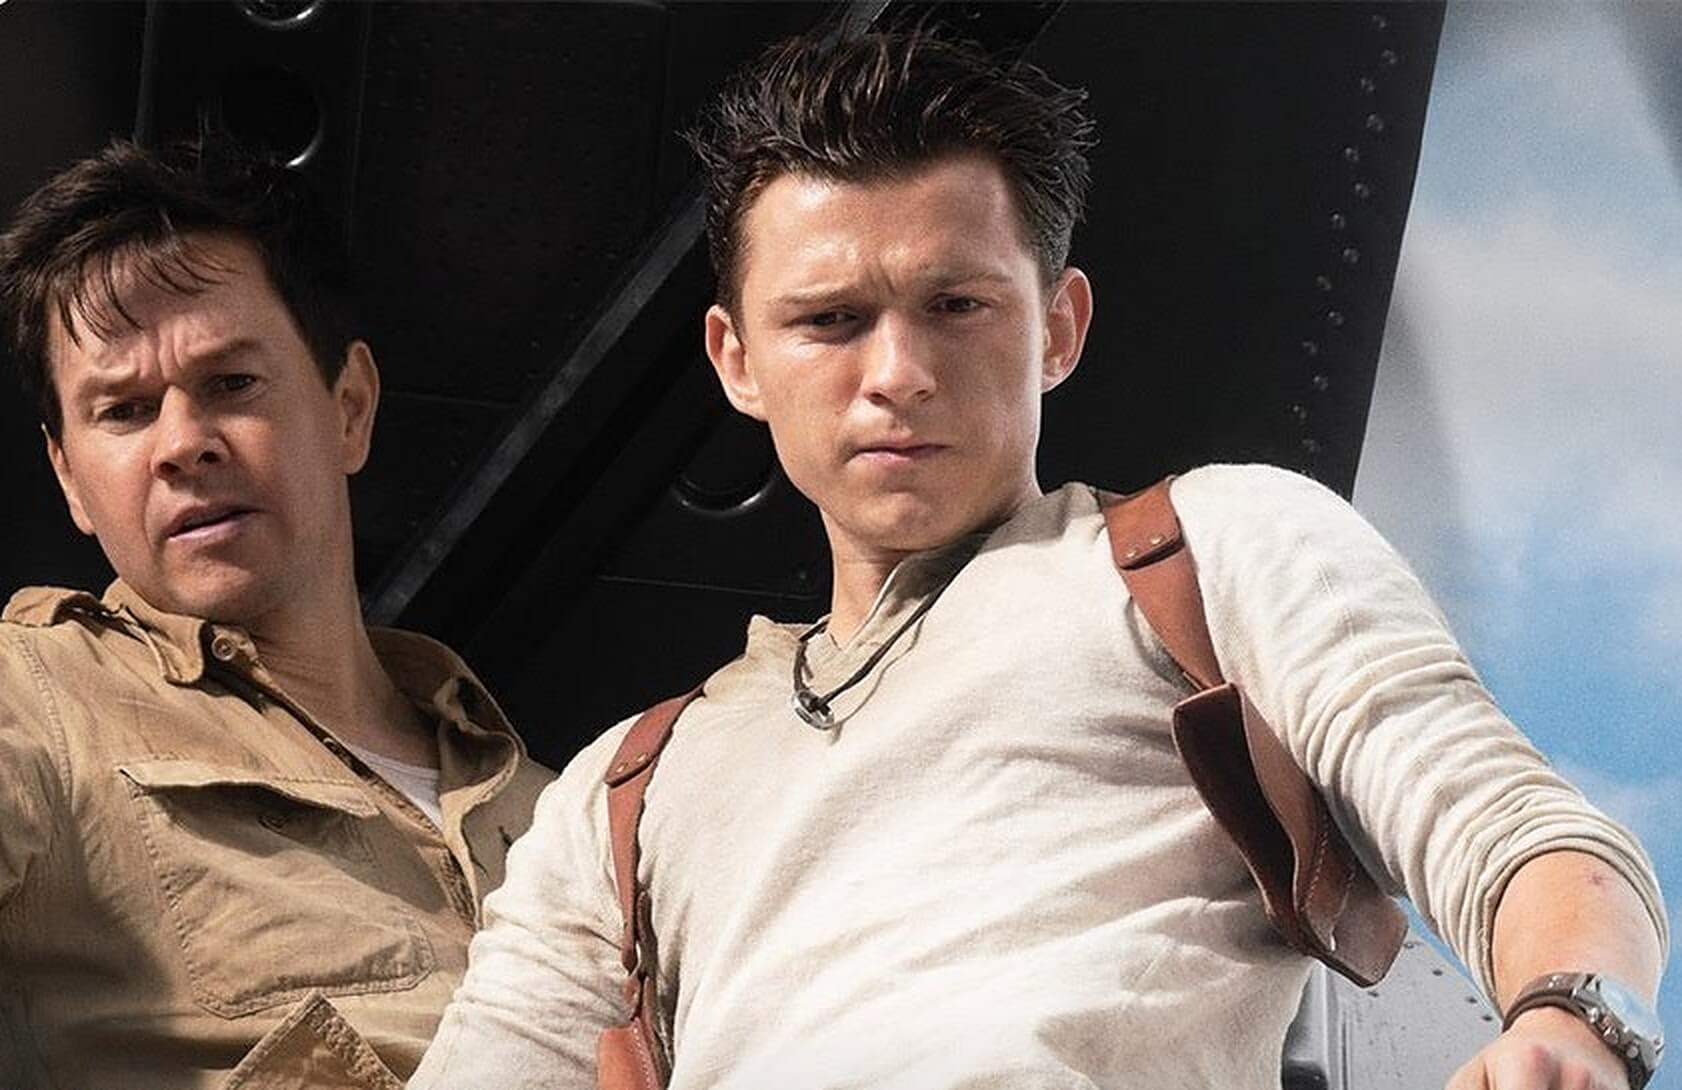 Tom Holland and Mark Wahlberg as Nathan Drake and Sully in Uncharted movie trailer 2